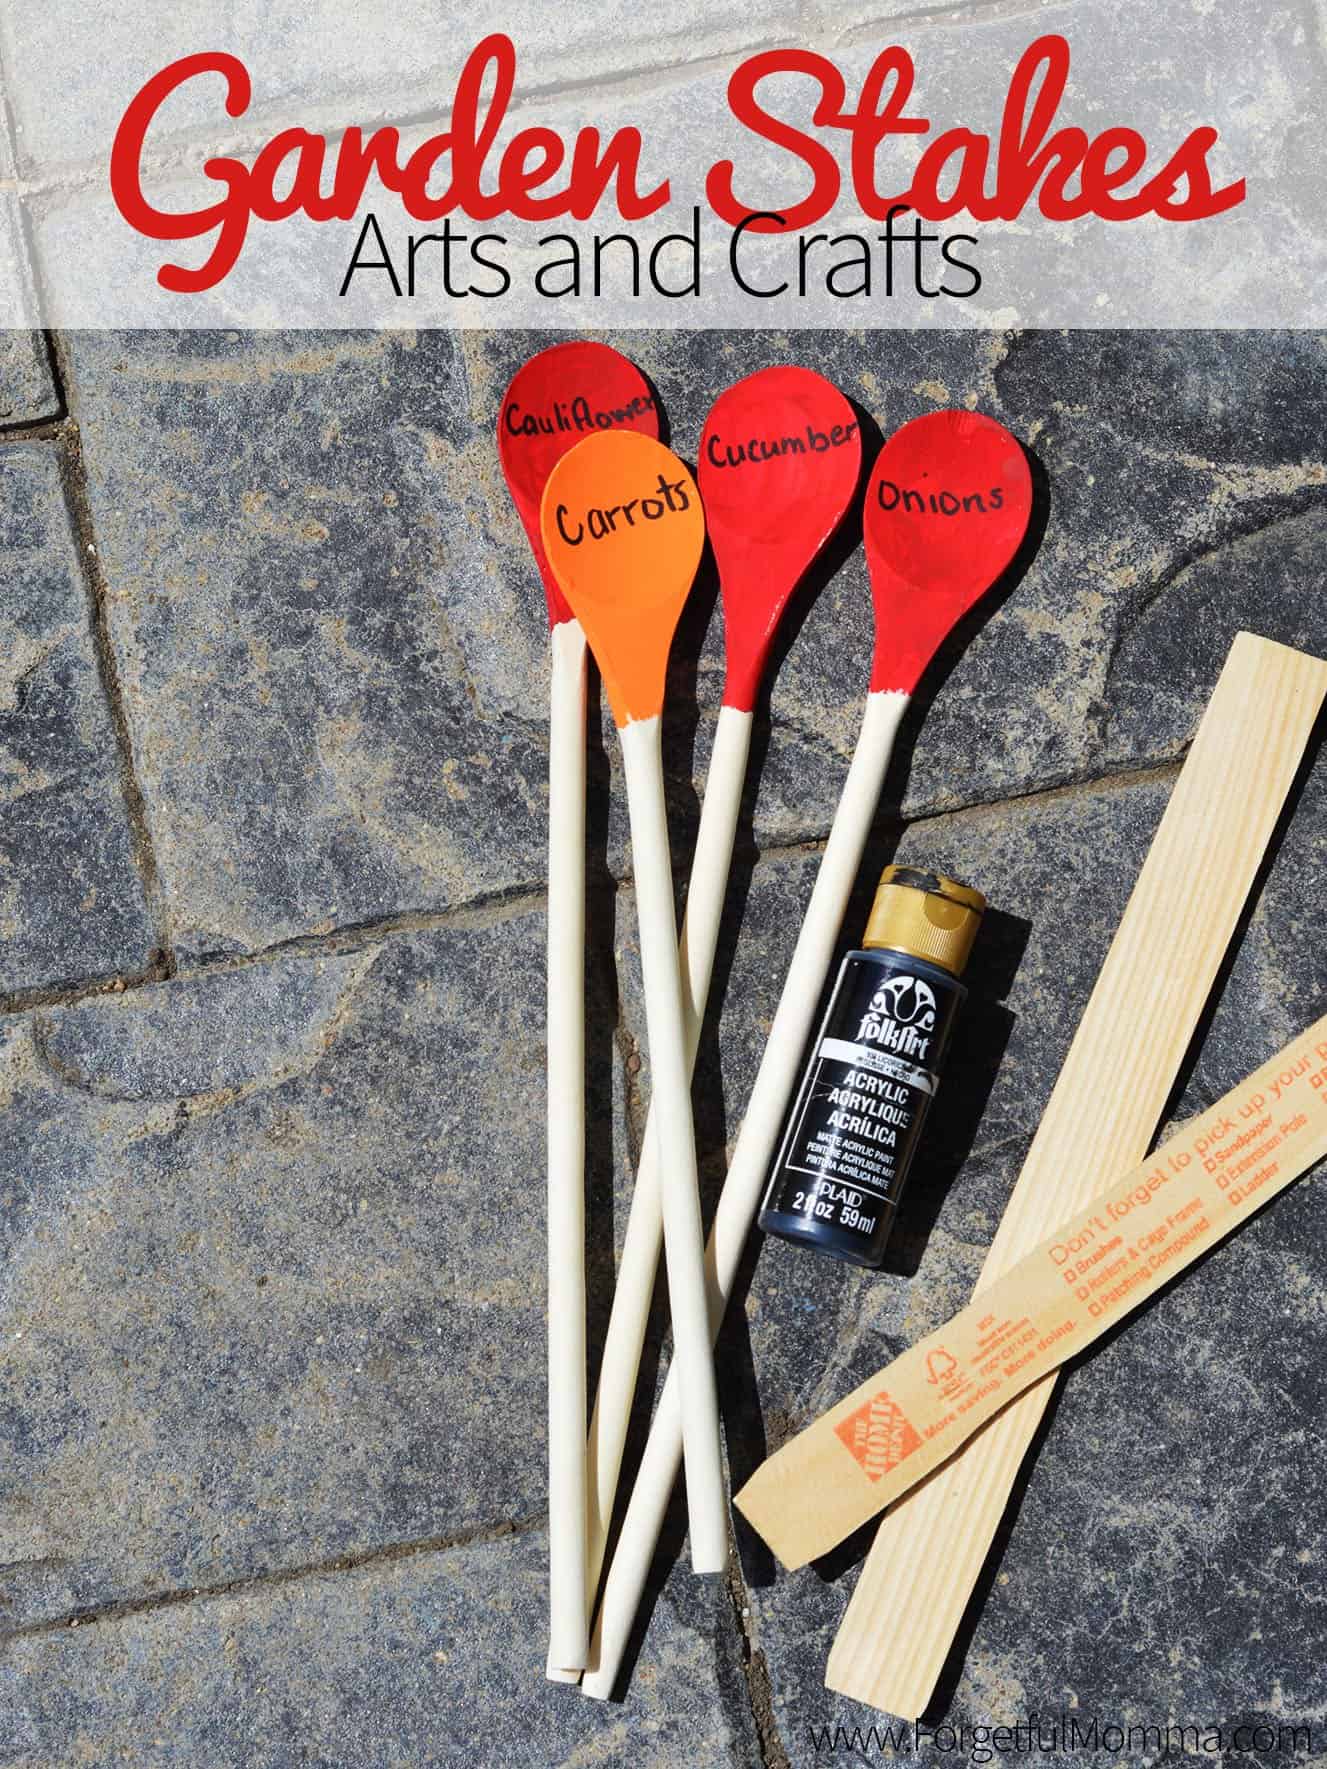 Garden Stakes Arts and Crafts